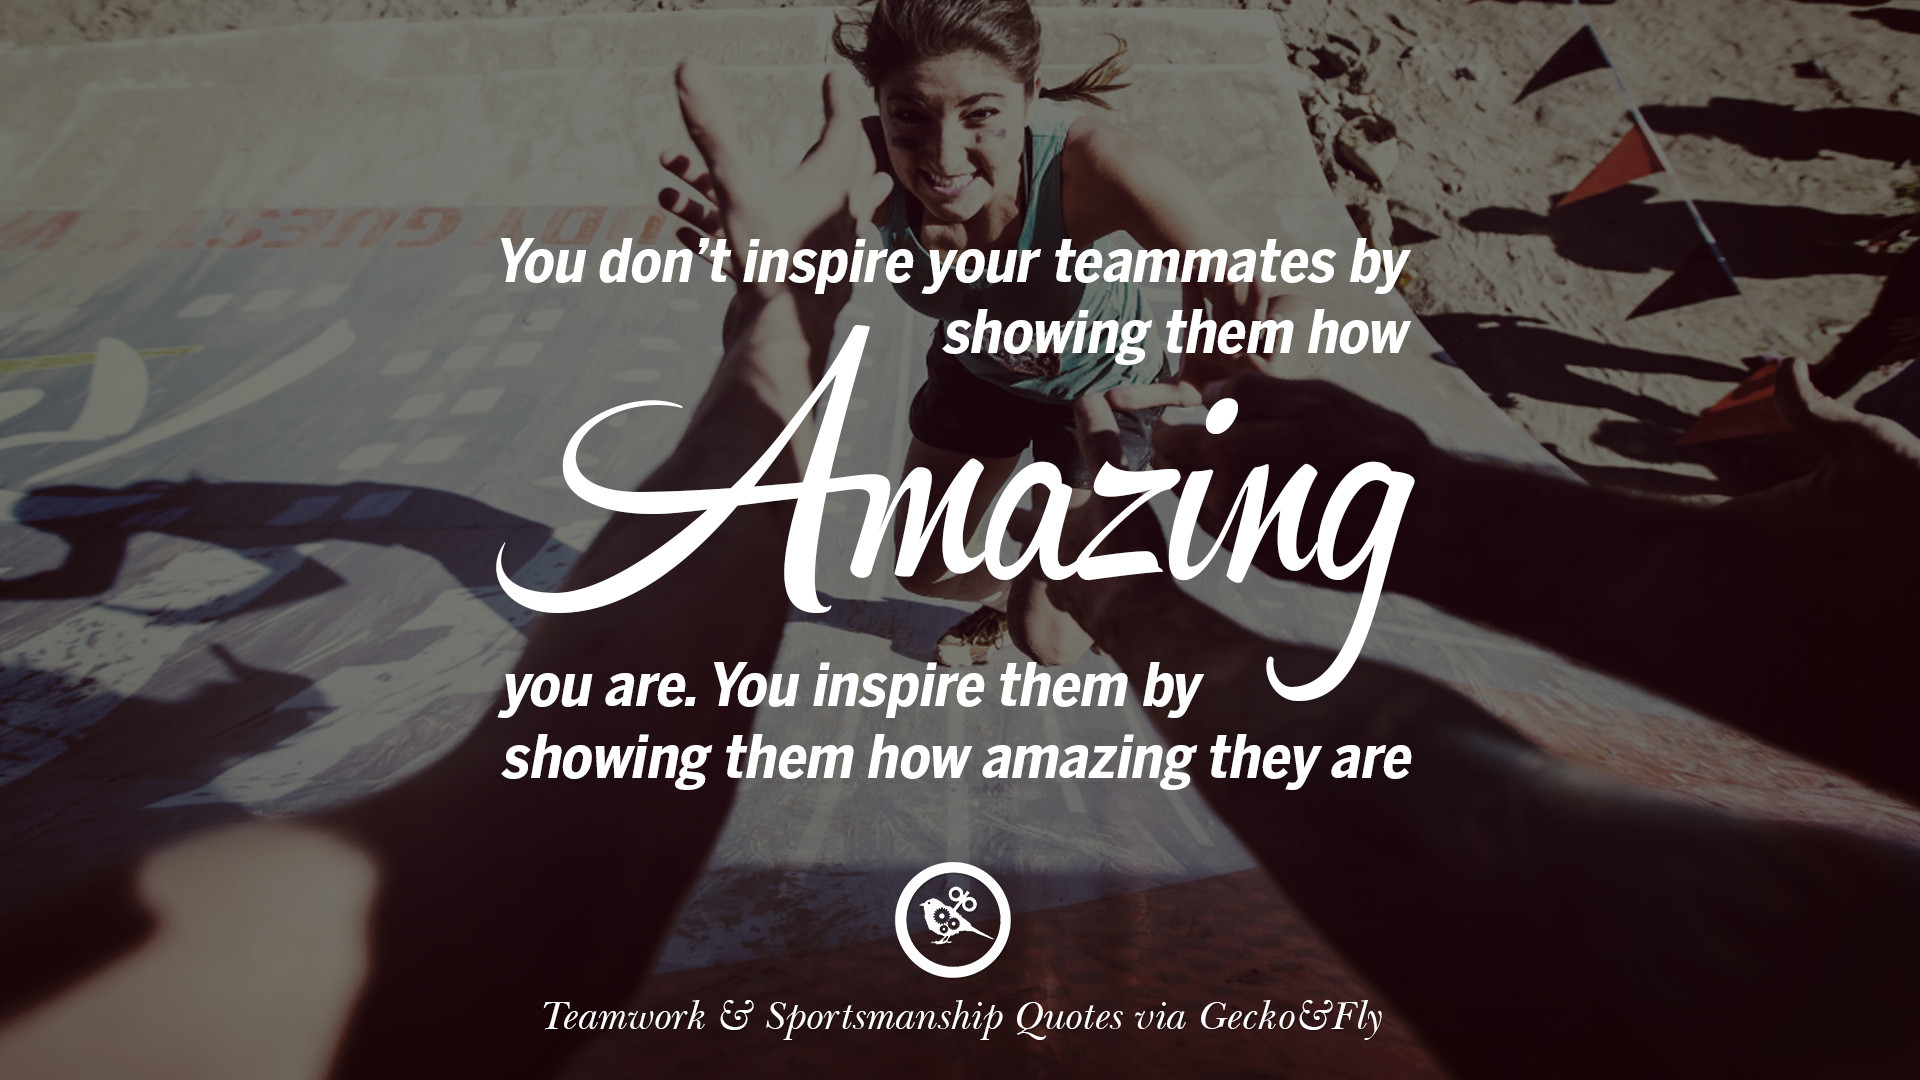 Teamwork Quotes Inspirational
 50 Inspirational Quotes About Teamwork And Sportsmanship